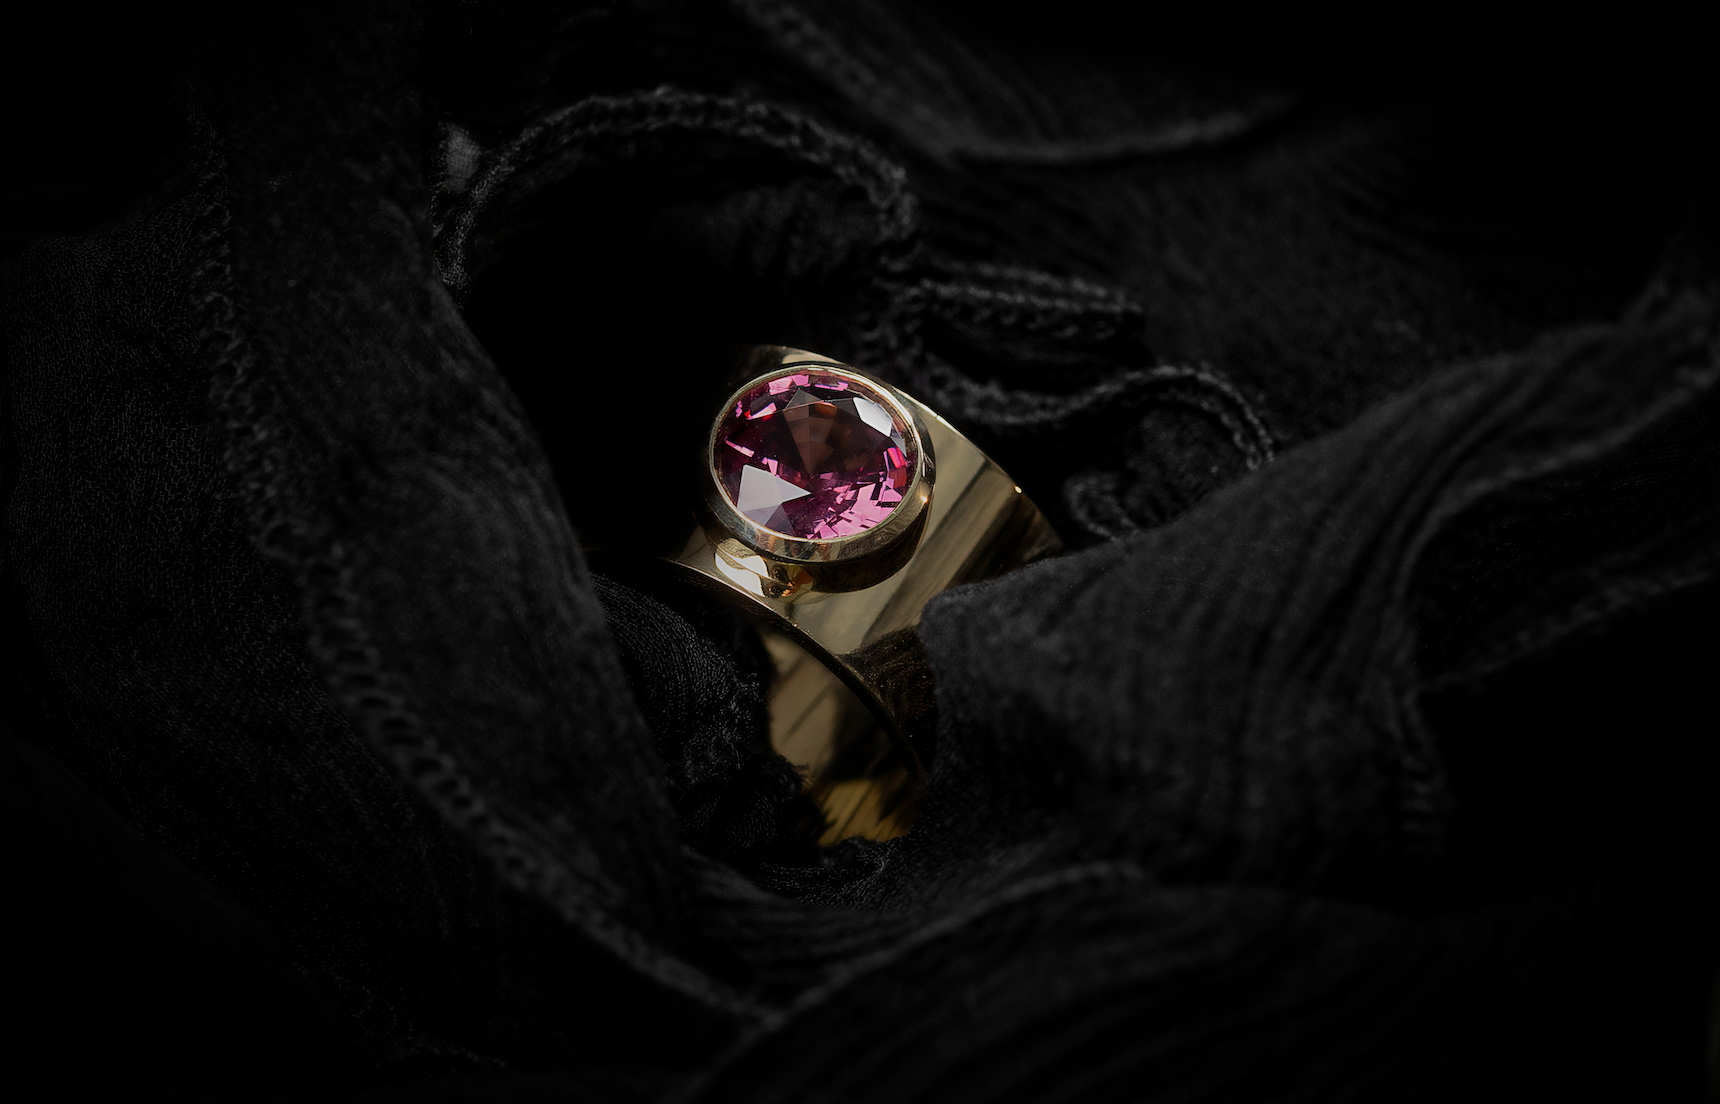 ILA SODHANI Aubergine Ring with a magenta natural spinel stone set into a wide yellow gold band; shown nestled amongst black fabric.